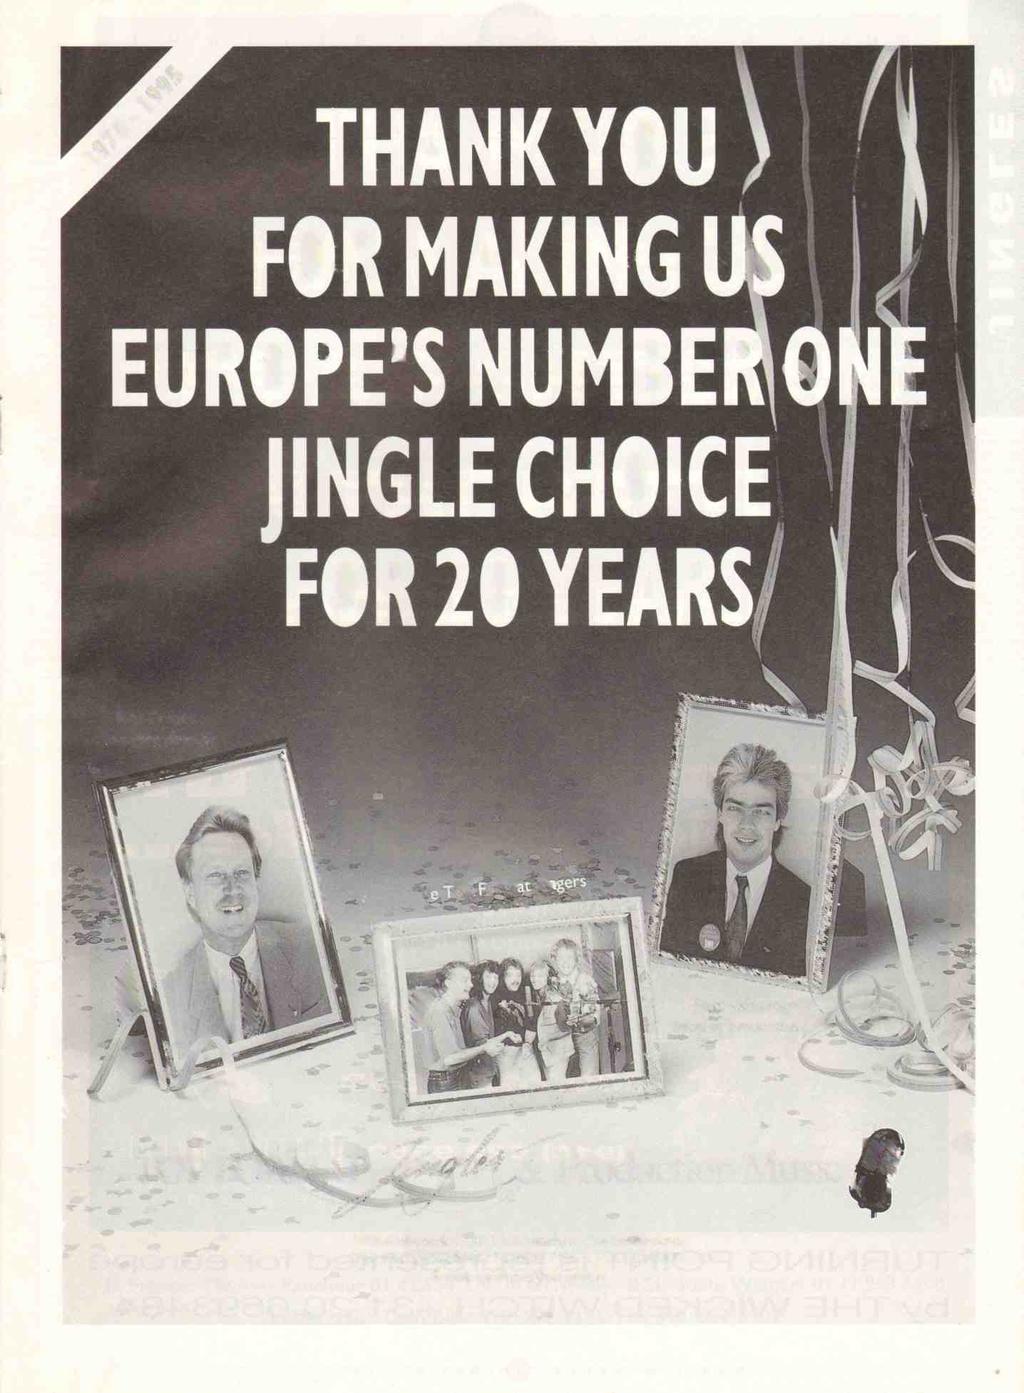 AS. THANK YOU FOR MAKING EUROPE'S NUMBE' JINGLE